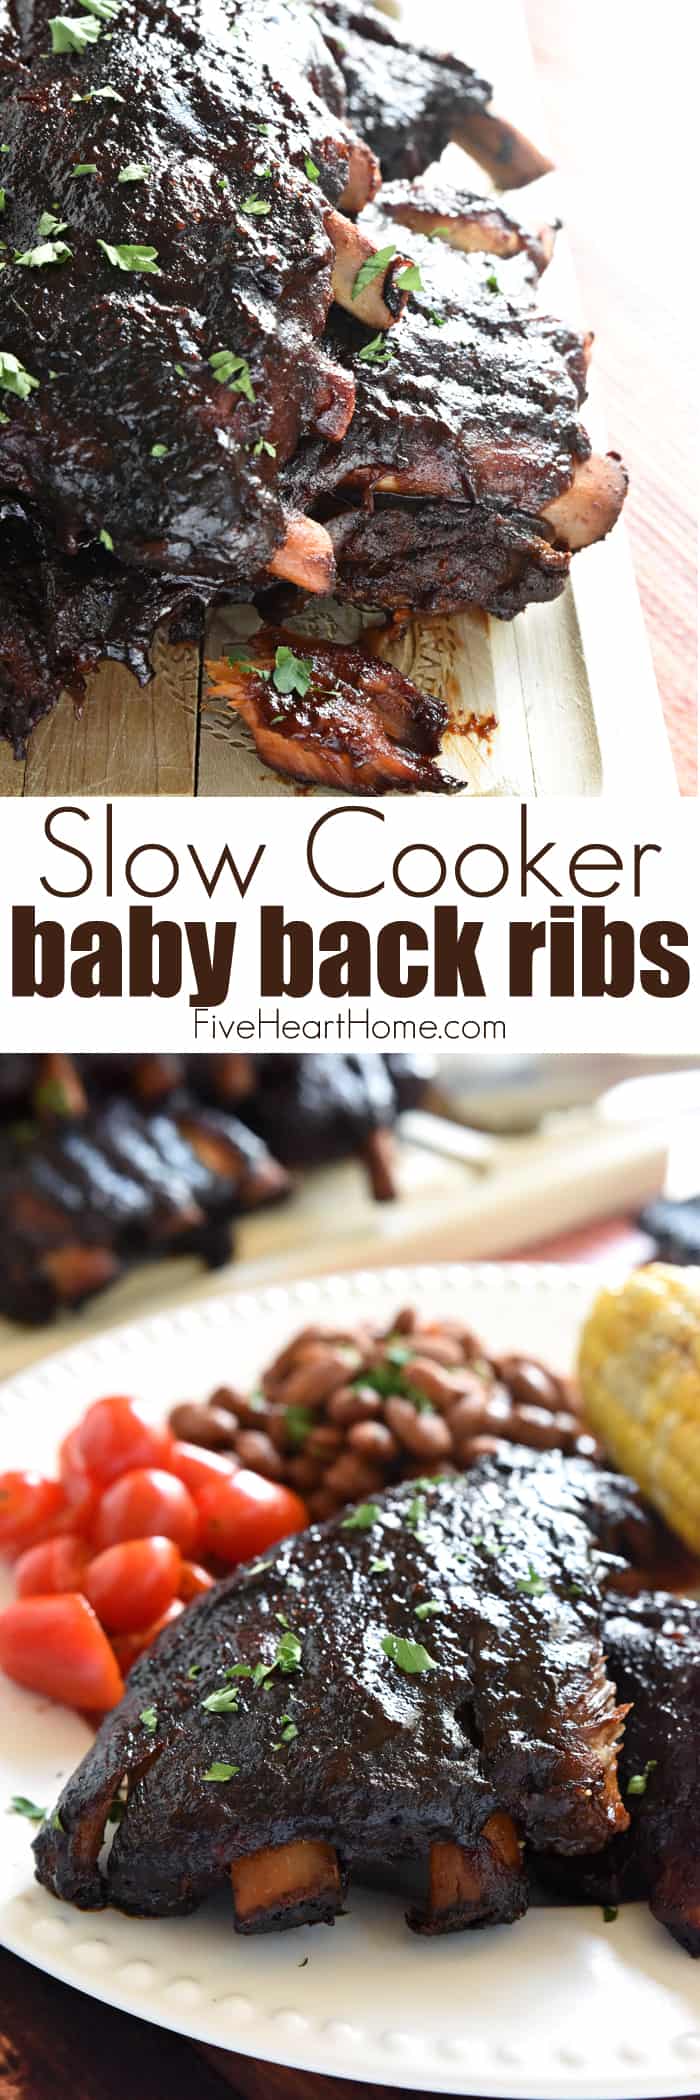 Slow Cooker Baby Back Ribs Collage with Text Overlay 